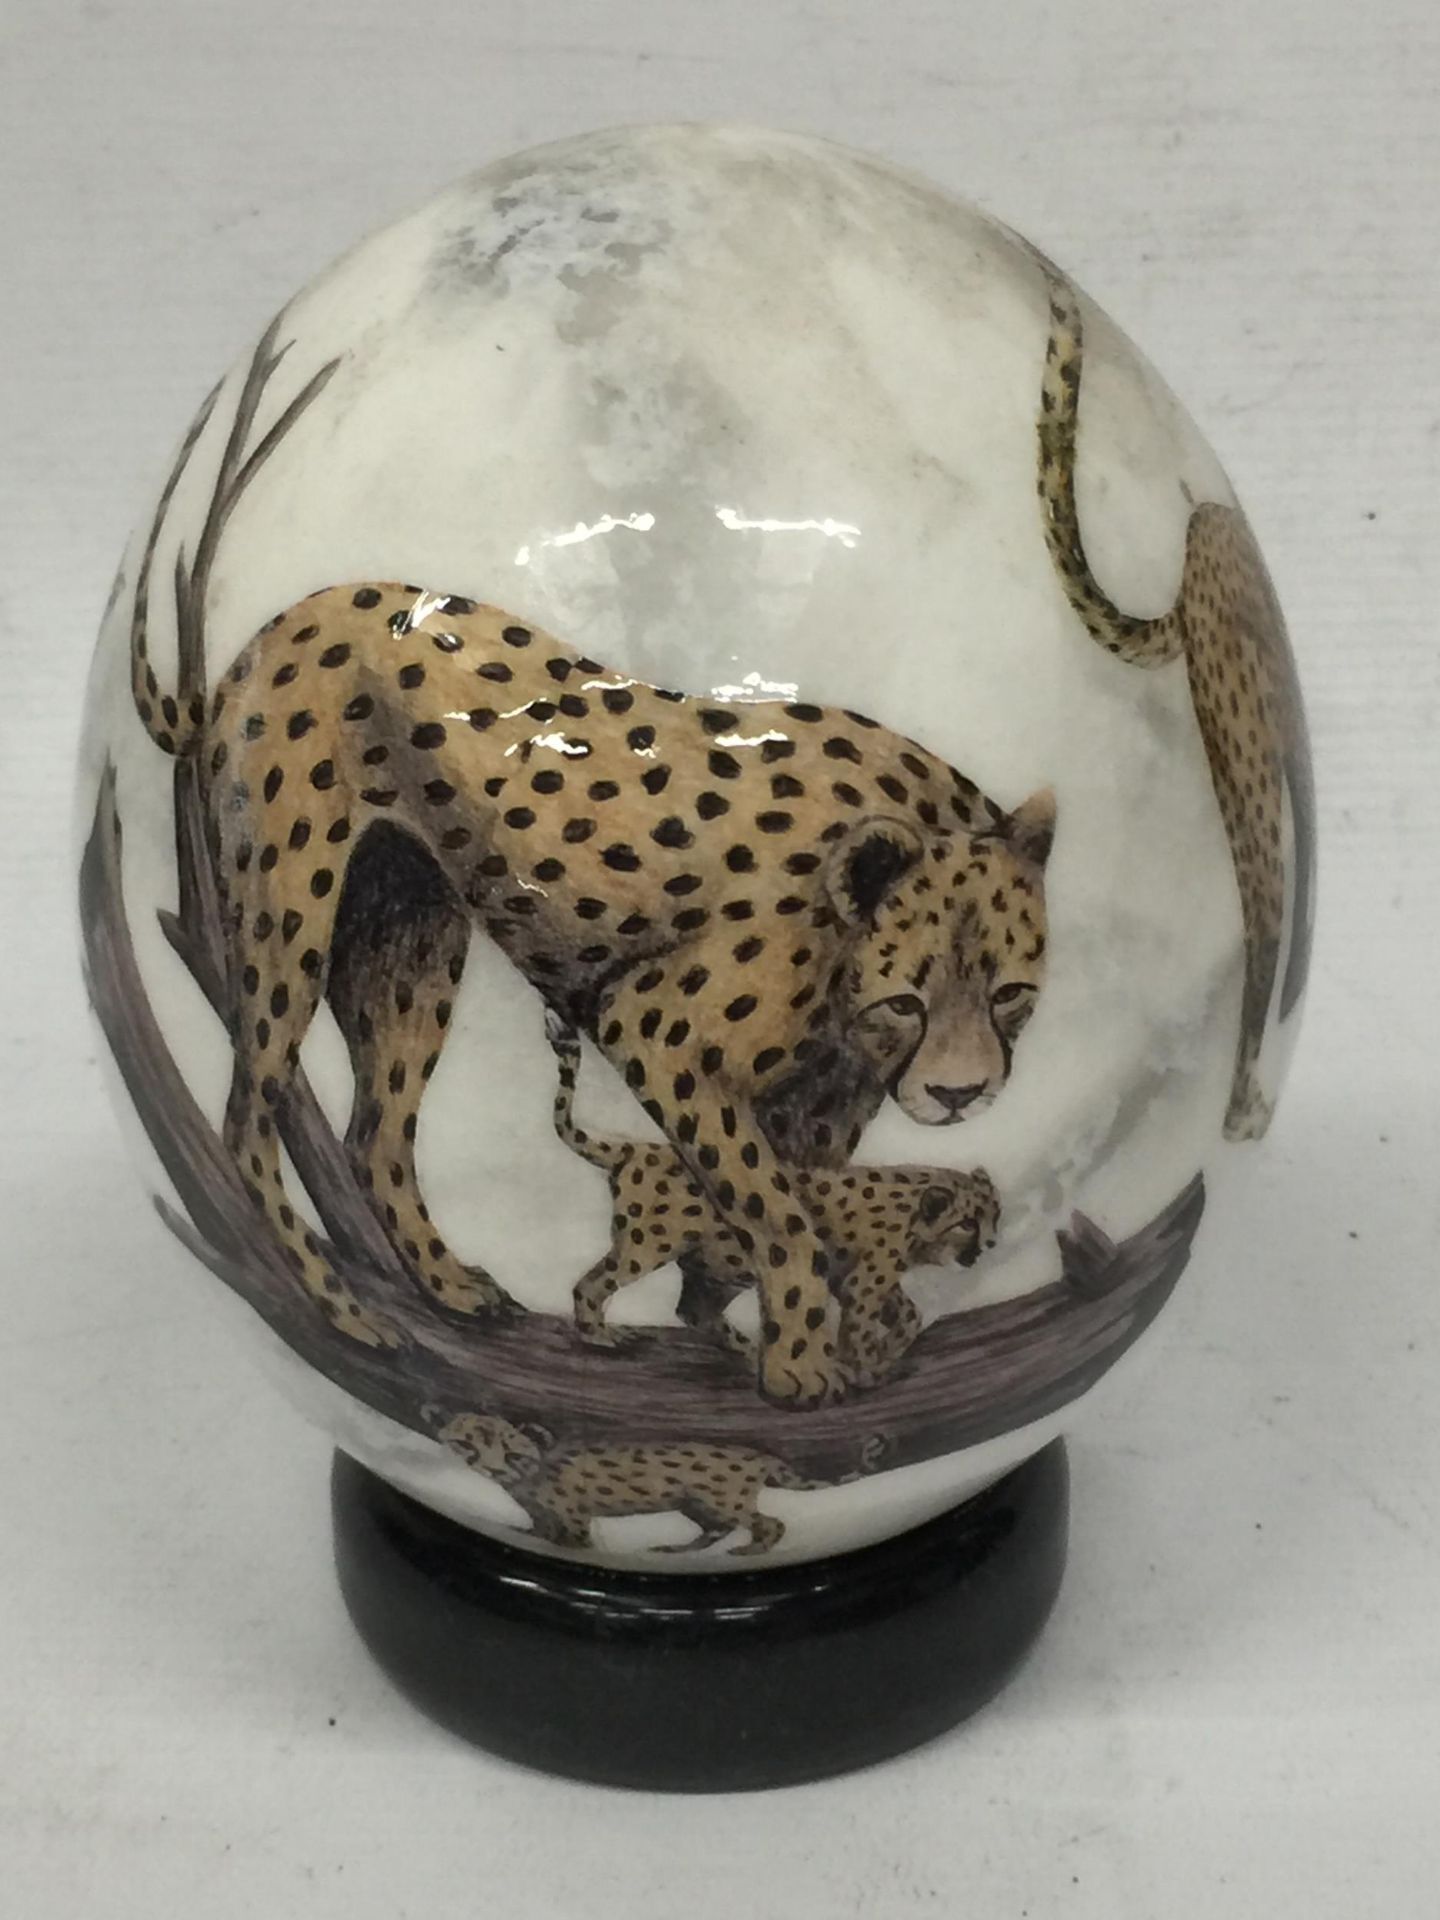 A HAND PAINTED OSTRICH EGG ON STAND WITH CHEETAH DESIGN, INDISTINCTLY SIGNED - Image 3 of 5